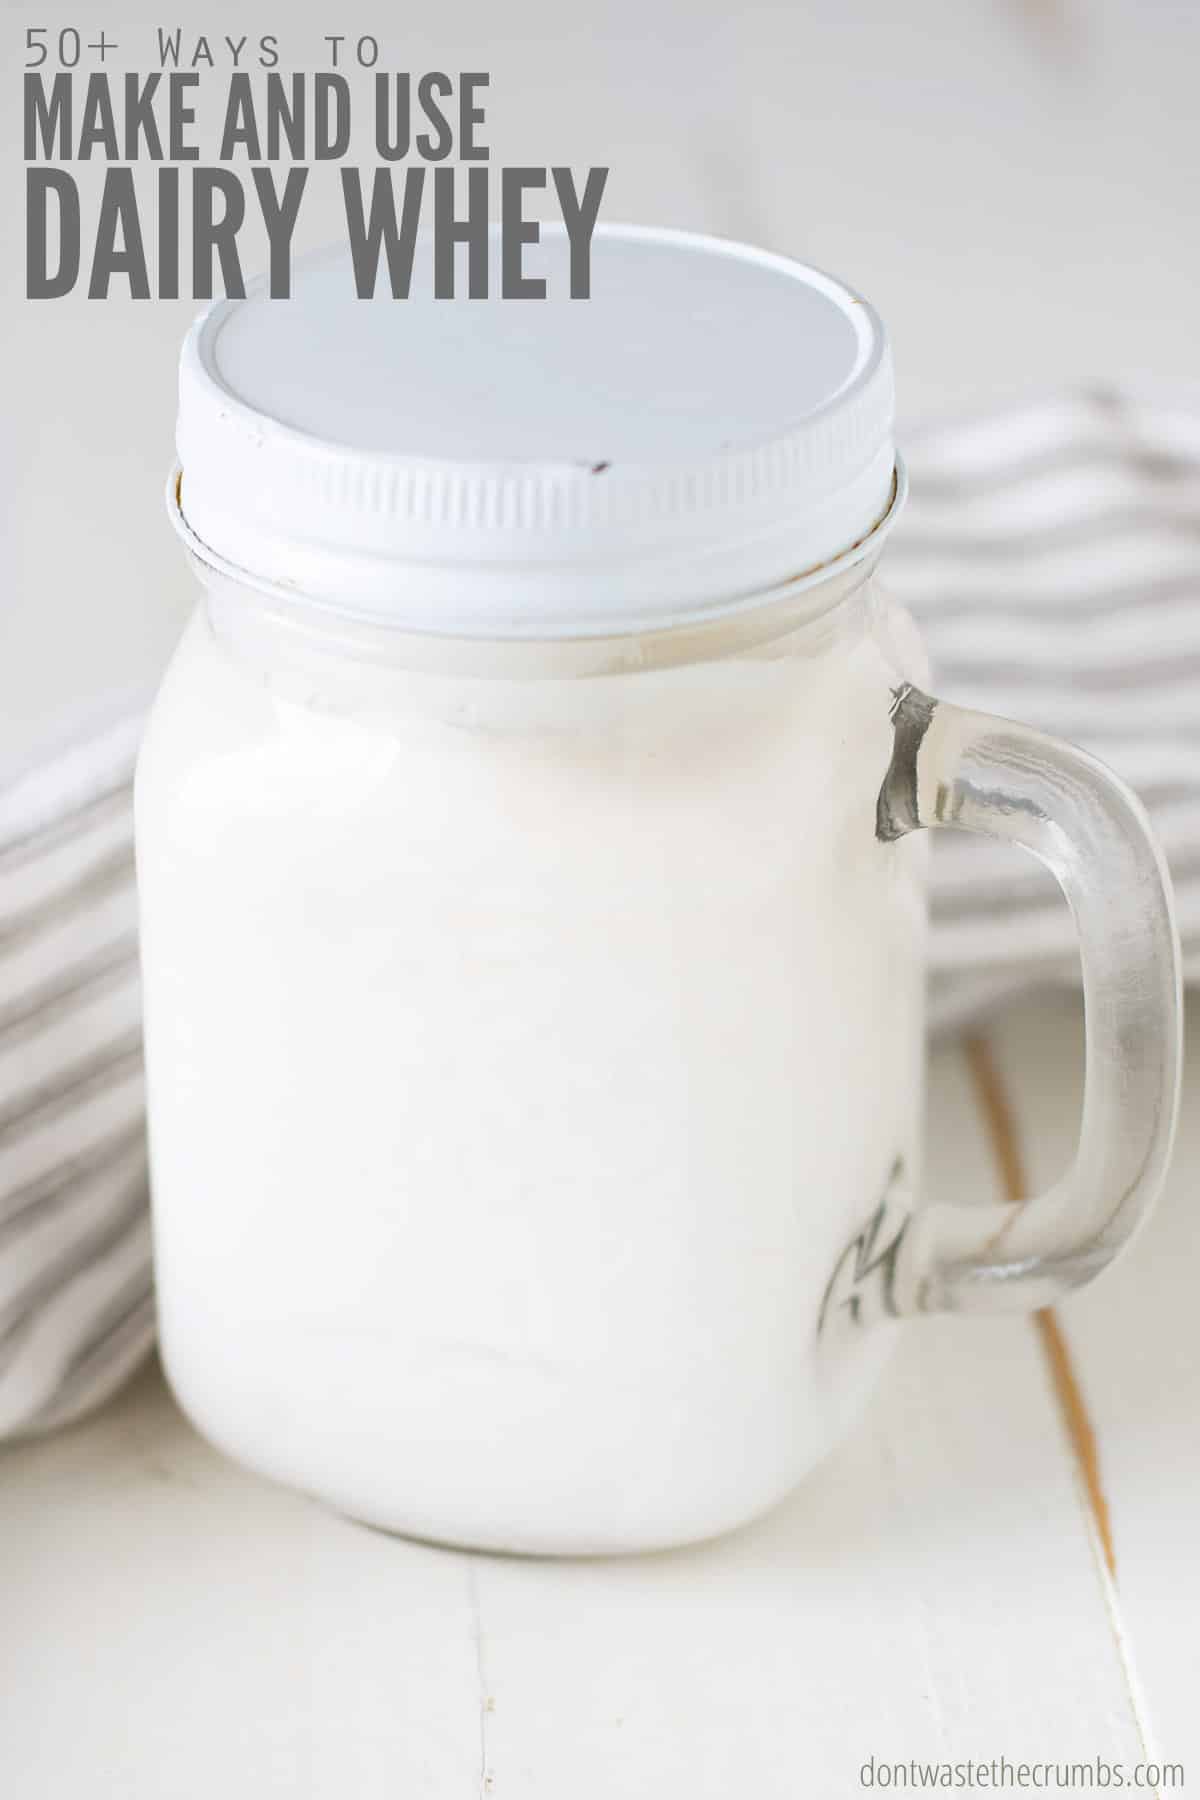 Mason jar with handle and lid with dairy whey. Text overlay reads "50+ Ways To Make And Use Dairy Whey" This list of 45+ practical uses for whey will make you think twice before pouring it down the drain!